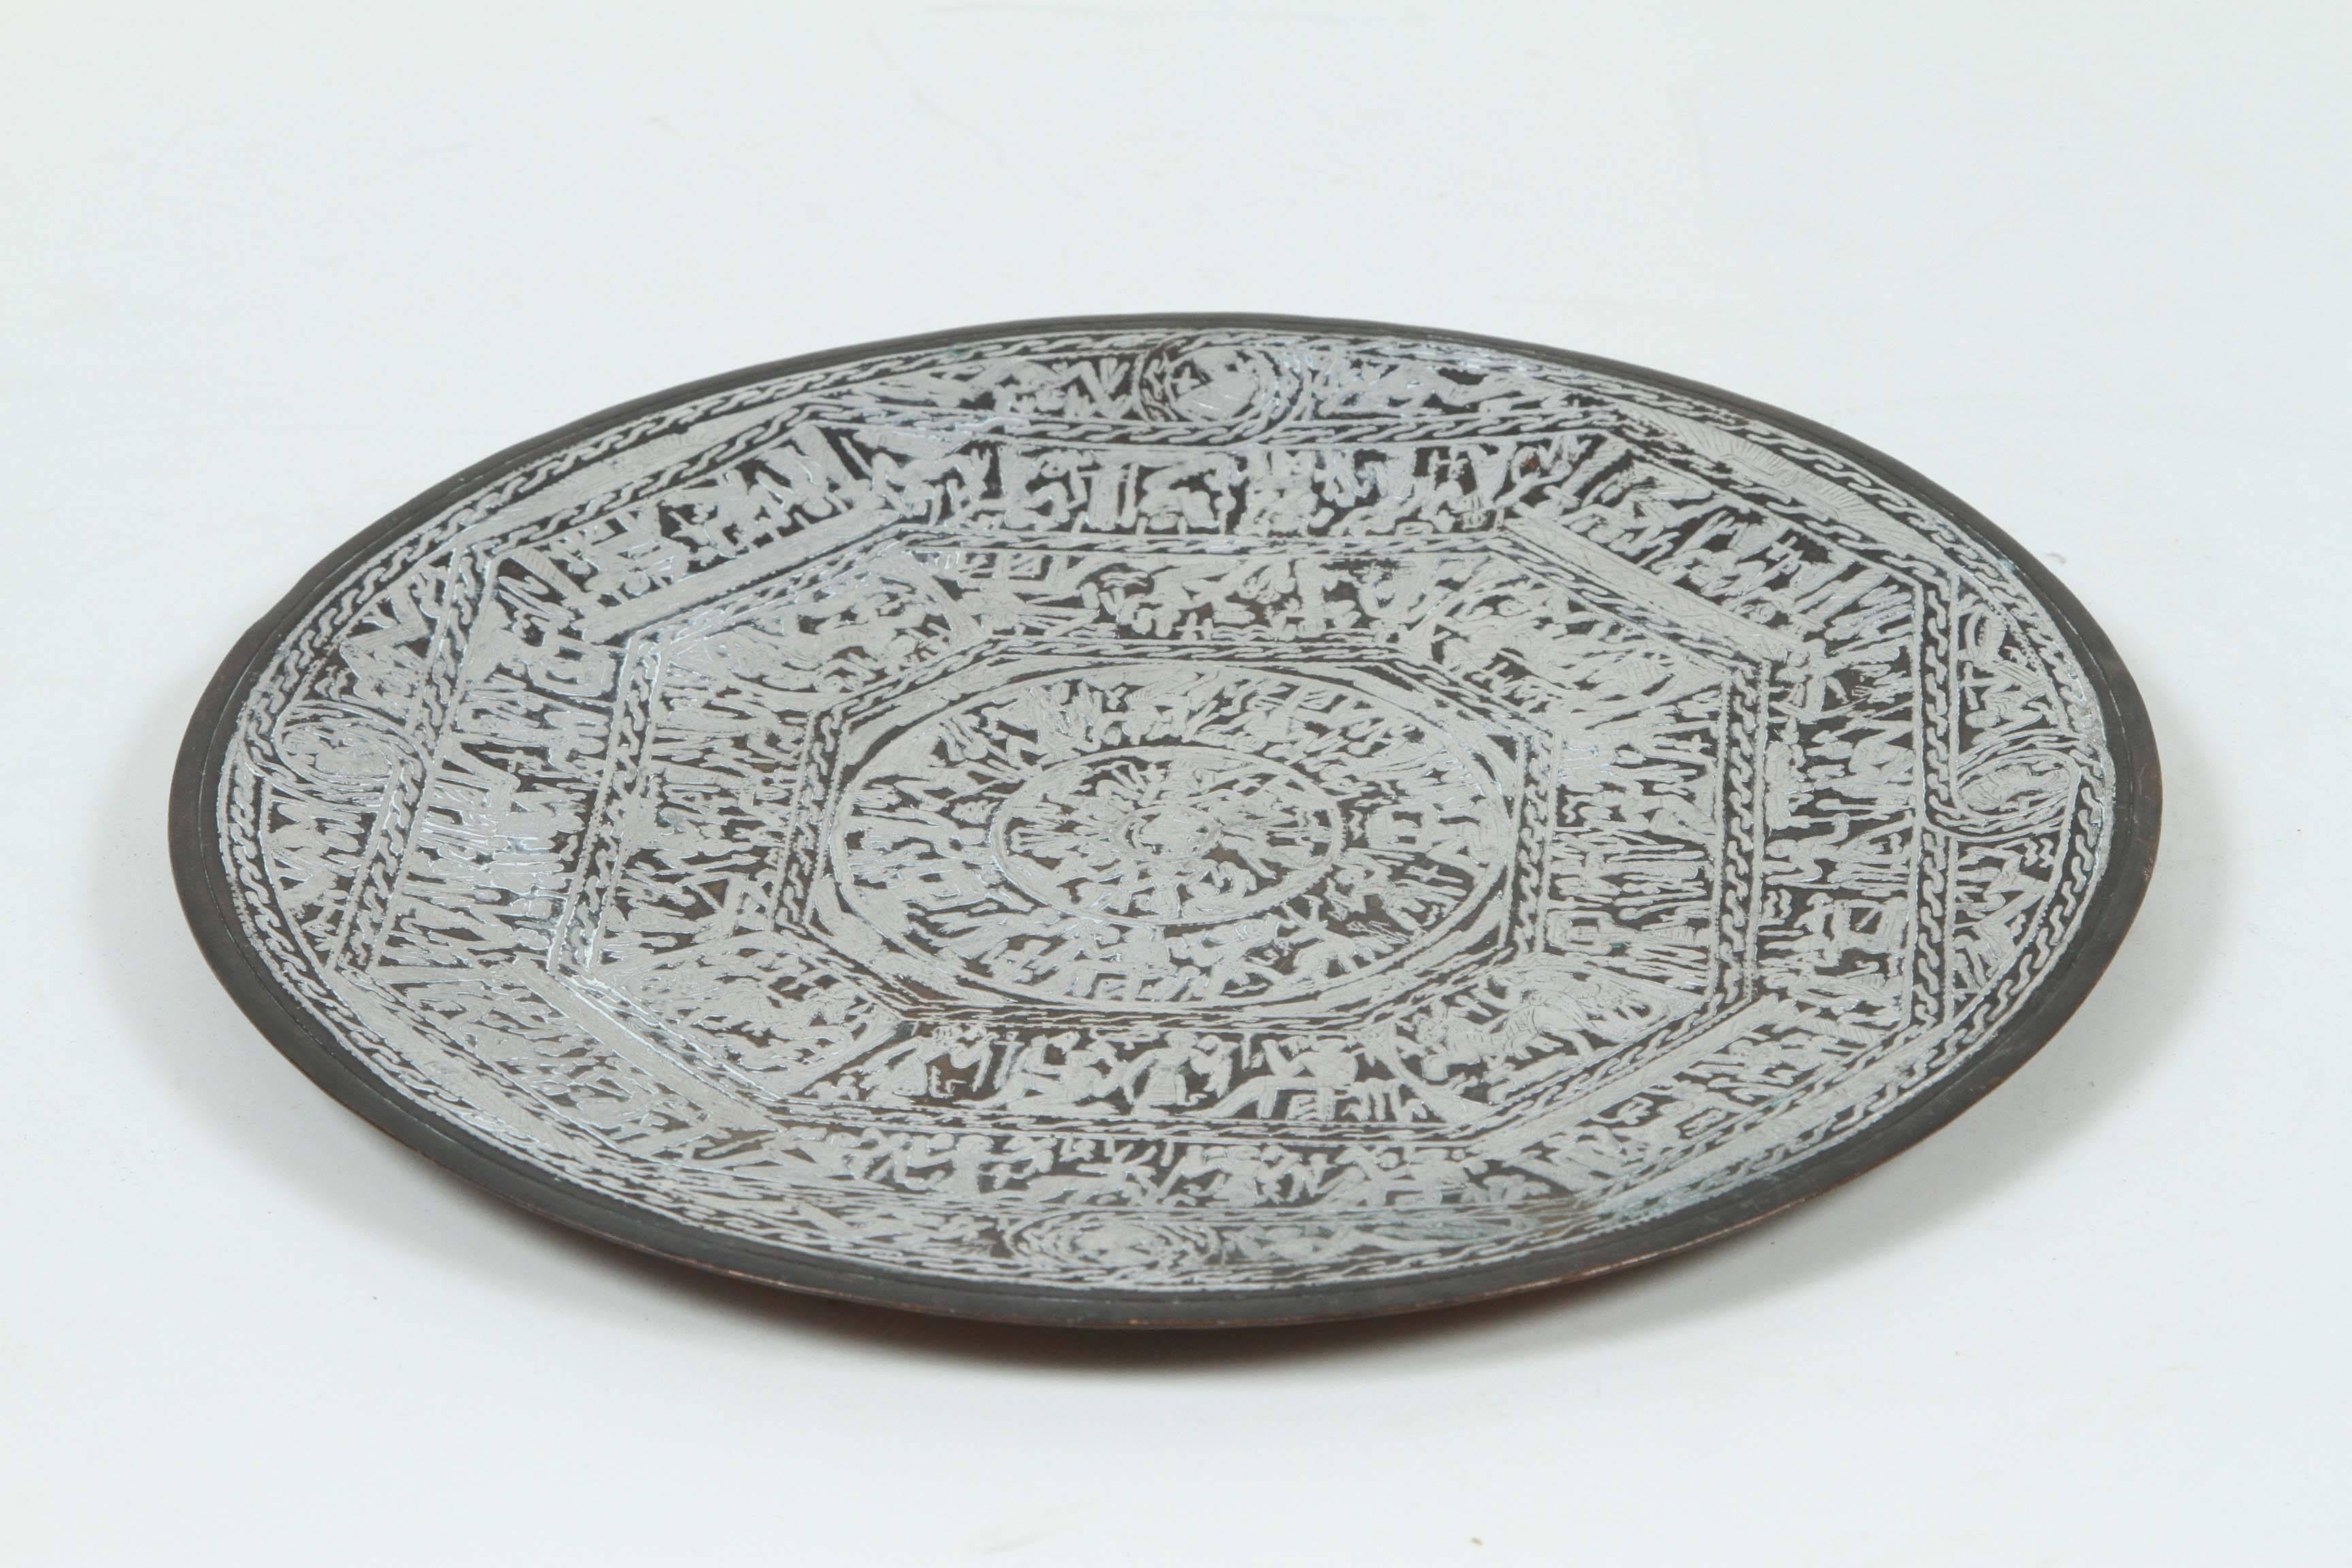 Egyptian brass tray, blackened and overlaid with silvered designs representing pharaonic scenes.
Hanging tray with a hook in the back to use as a wall hanging or use as a decorative piece.
Magnificent mid 20th century grand tour Egyptian revival